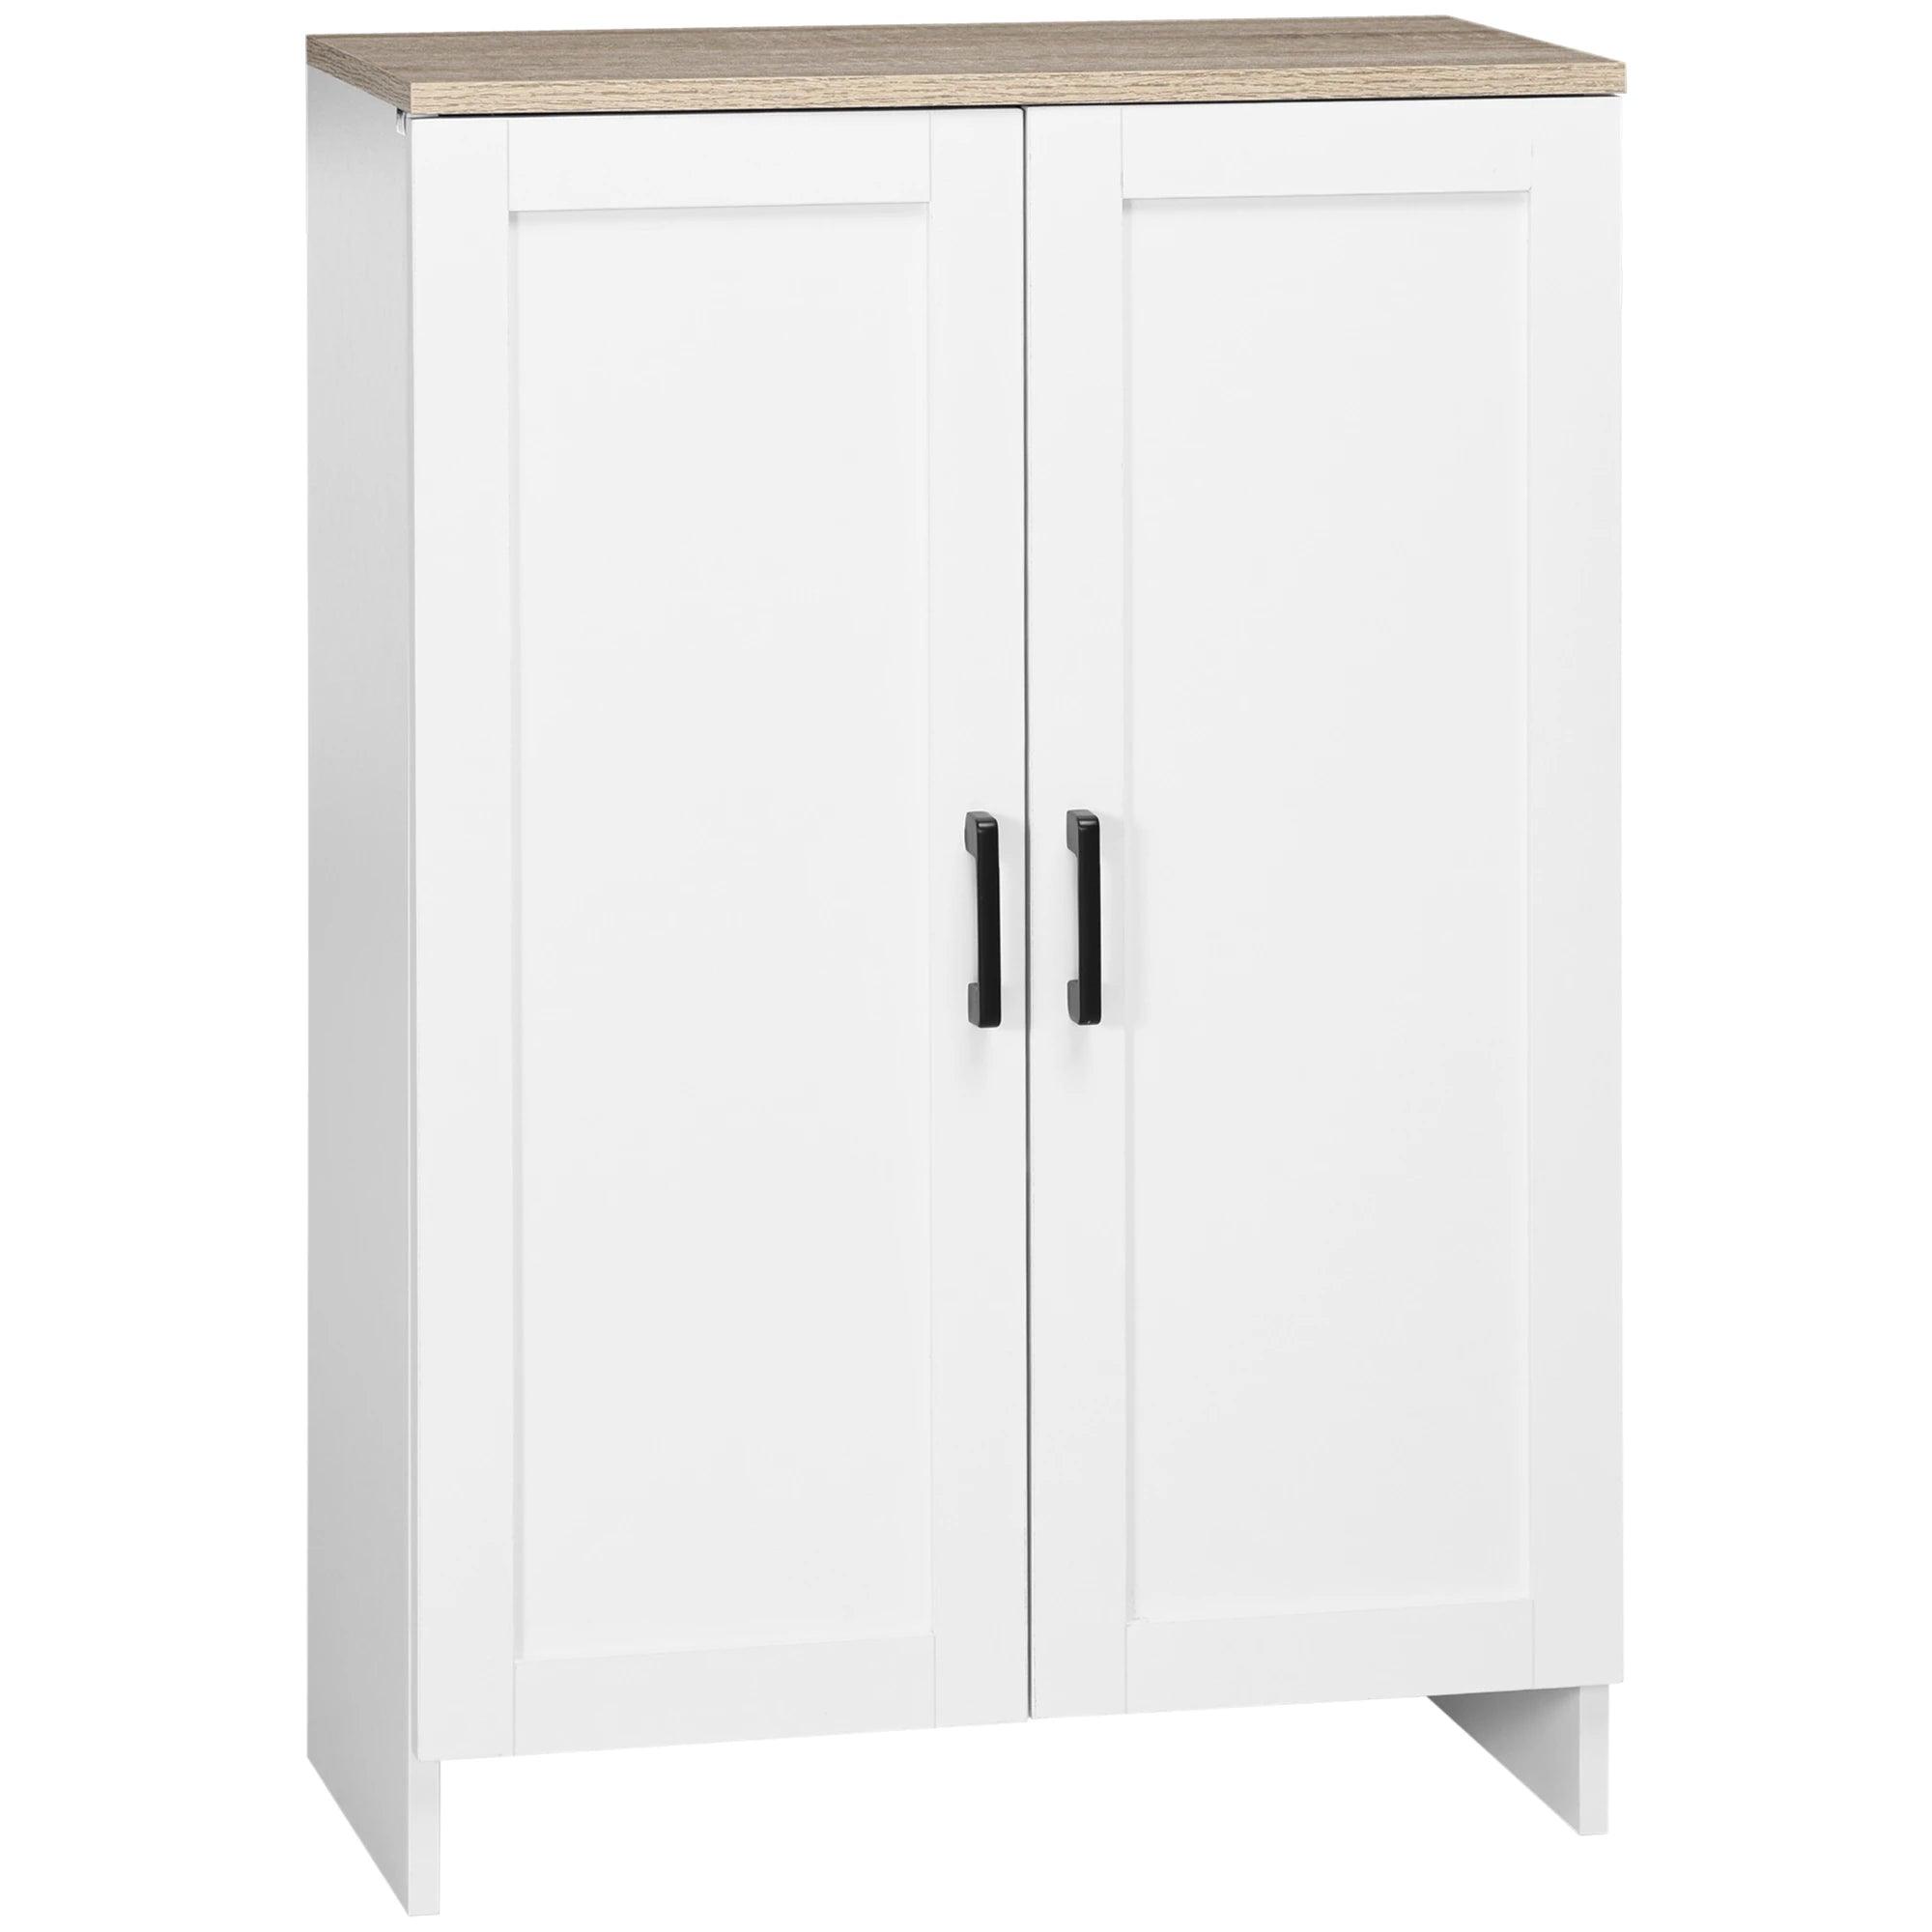 Modern Storage Cabinet with Doors and Adjustable Shelf for Kitchen, Living room, 23.6